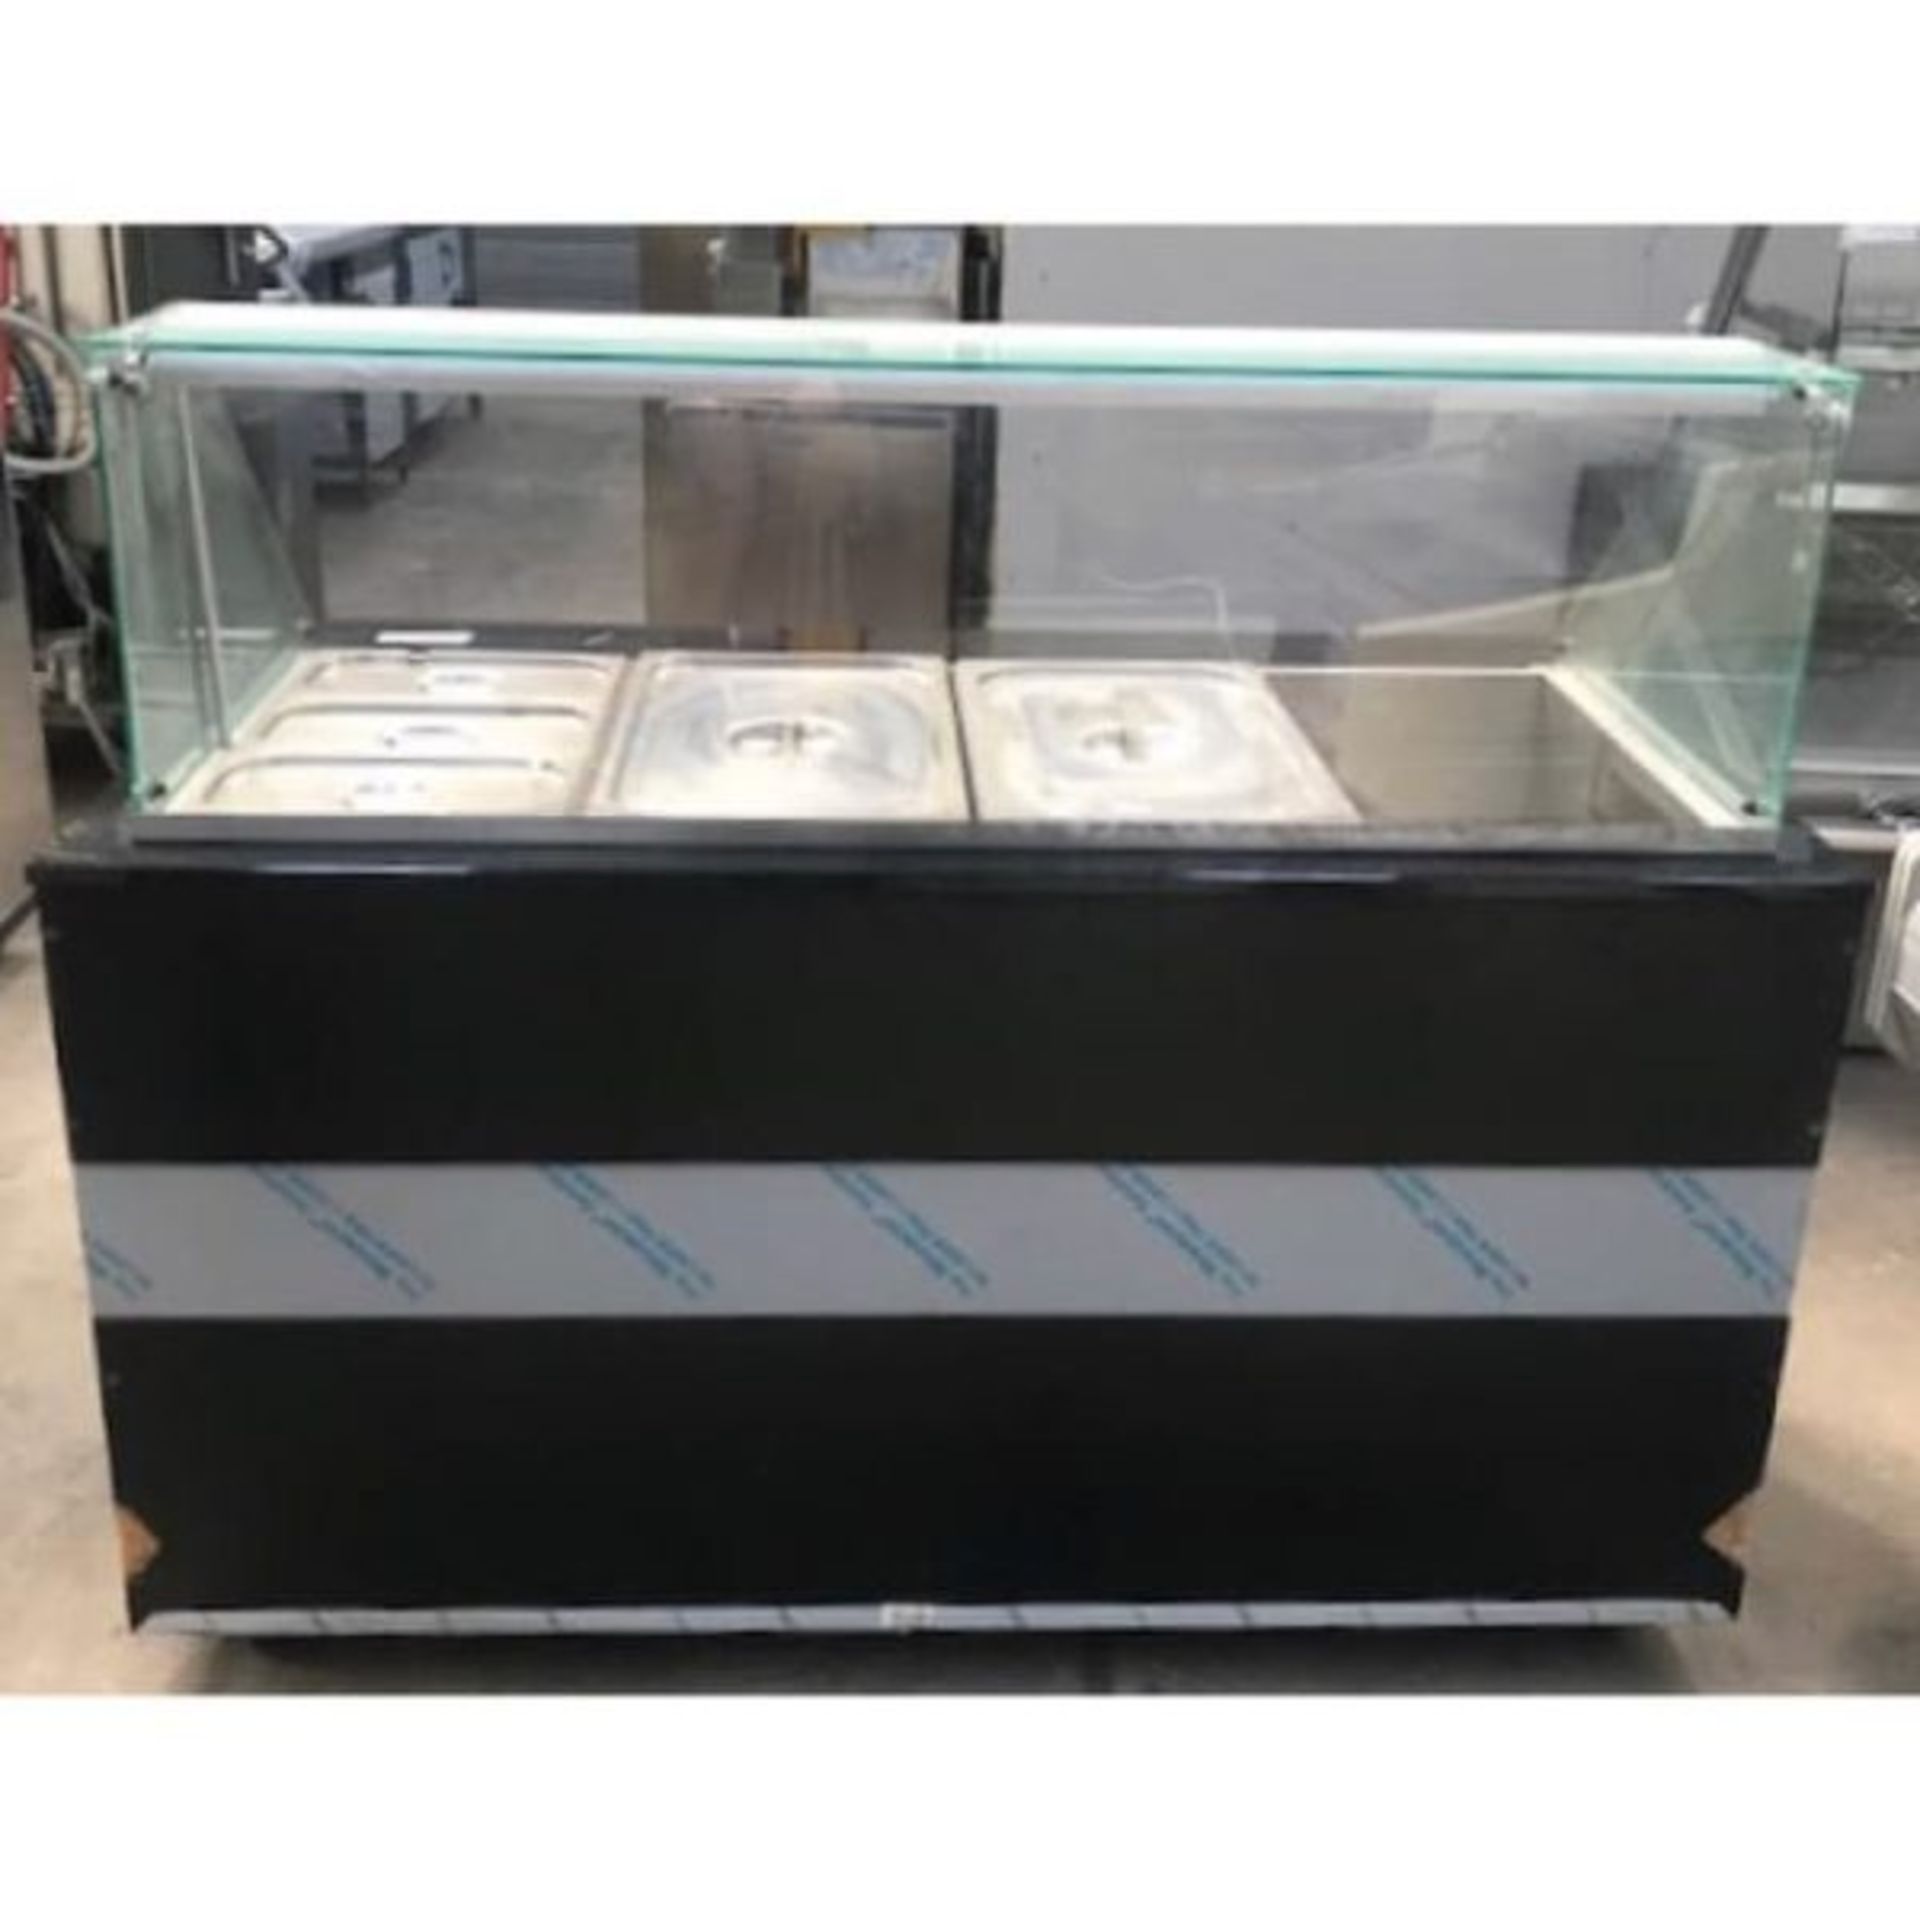 ZERO RESERVE Igloo Heated Servery with glass surround NST64174 - Image 2 of 2